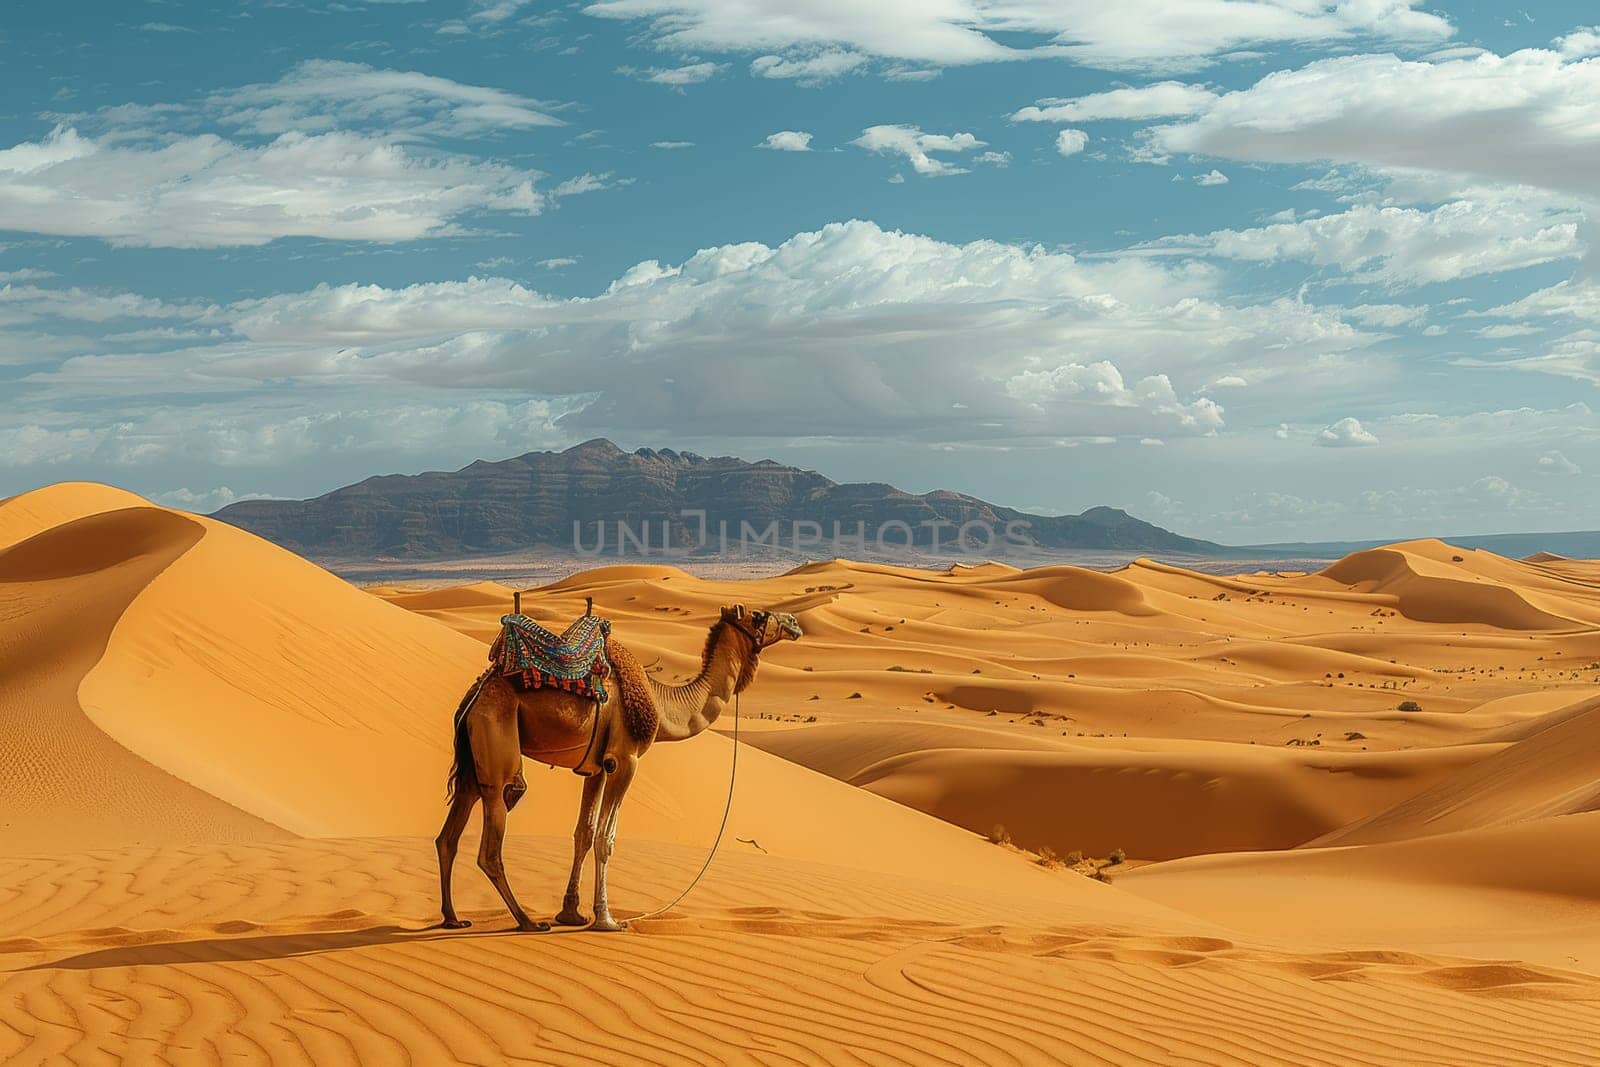 A camel is standing in the desert with a saddle on its back. The sky is clear and the sun is shining brightly. The scene is peaceful and serene